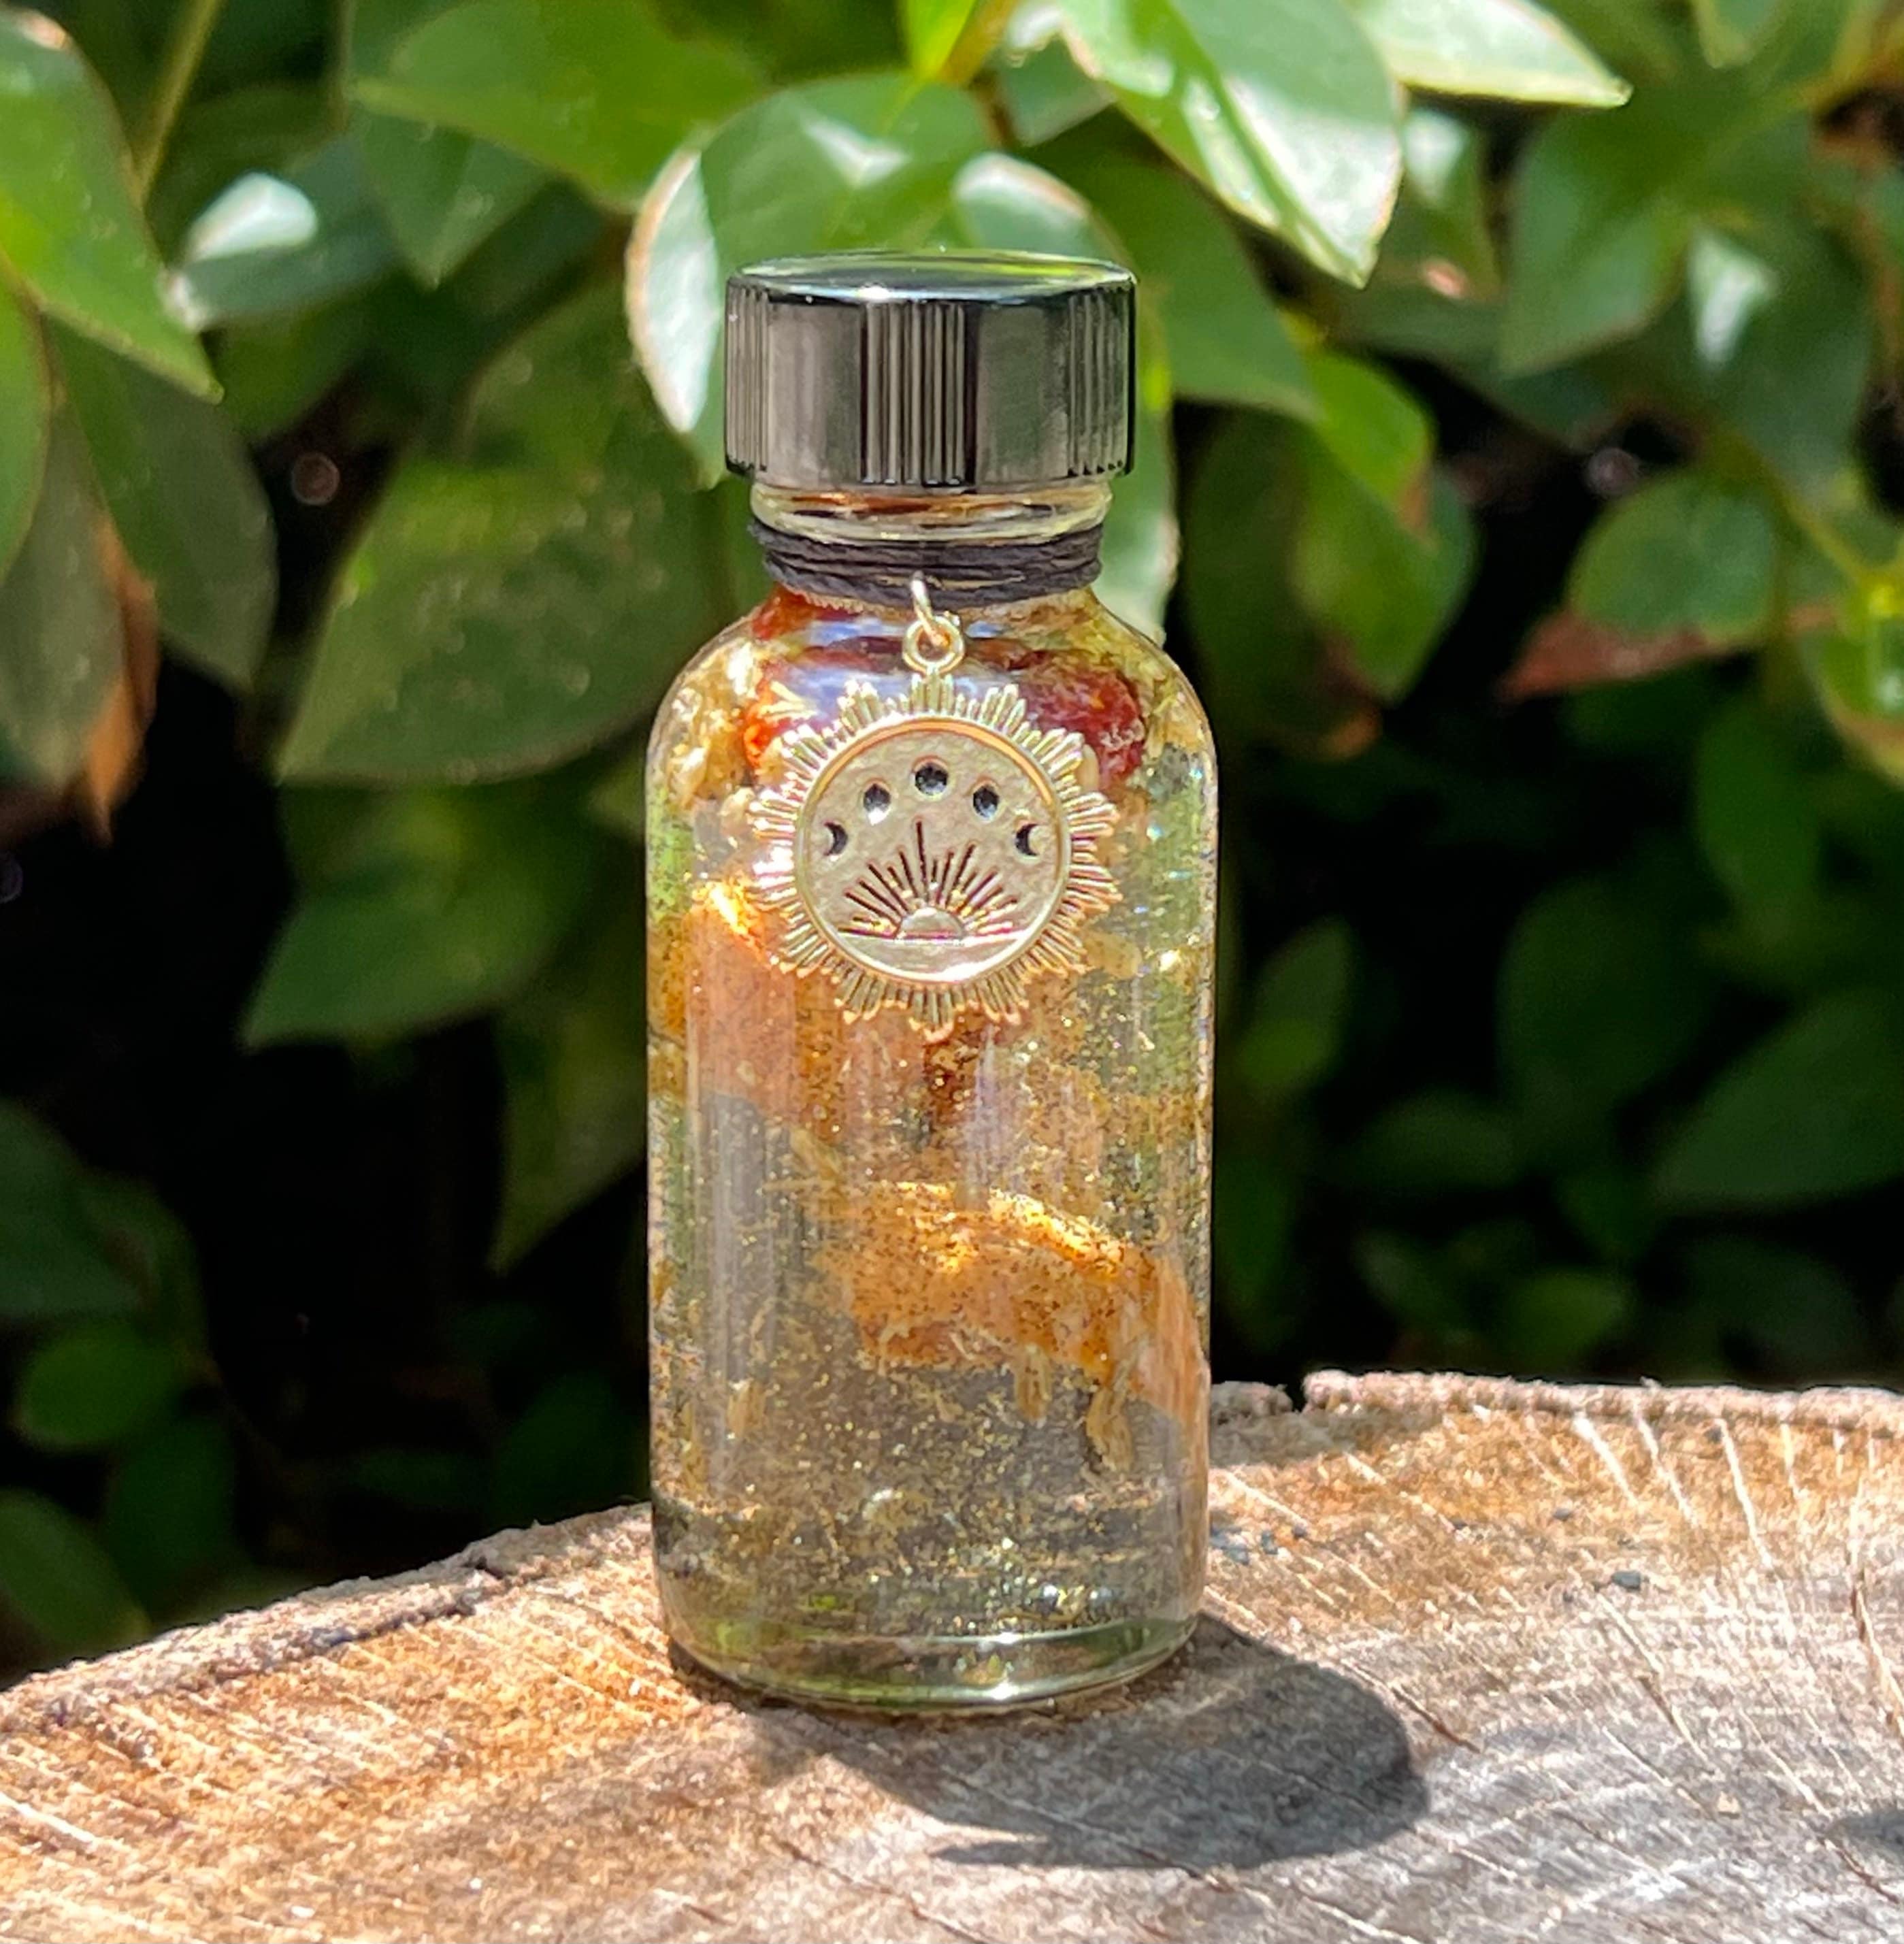 Amber Oil Incense Oil Perfume Meditation Anointing Oil 